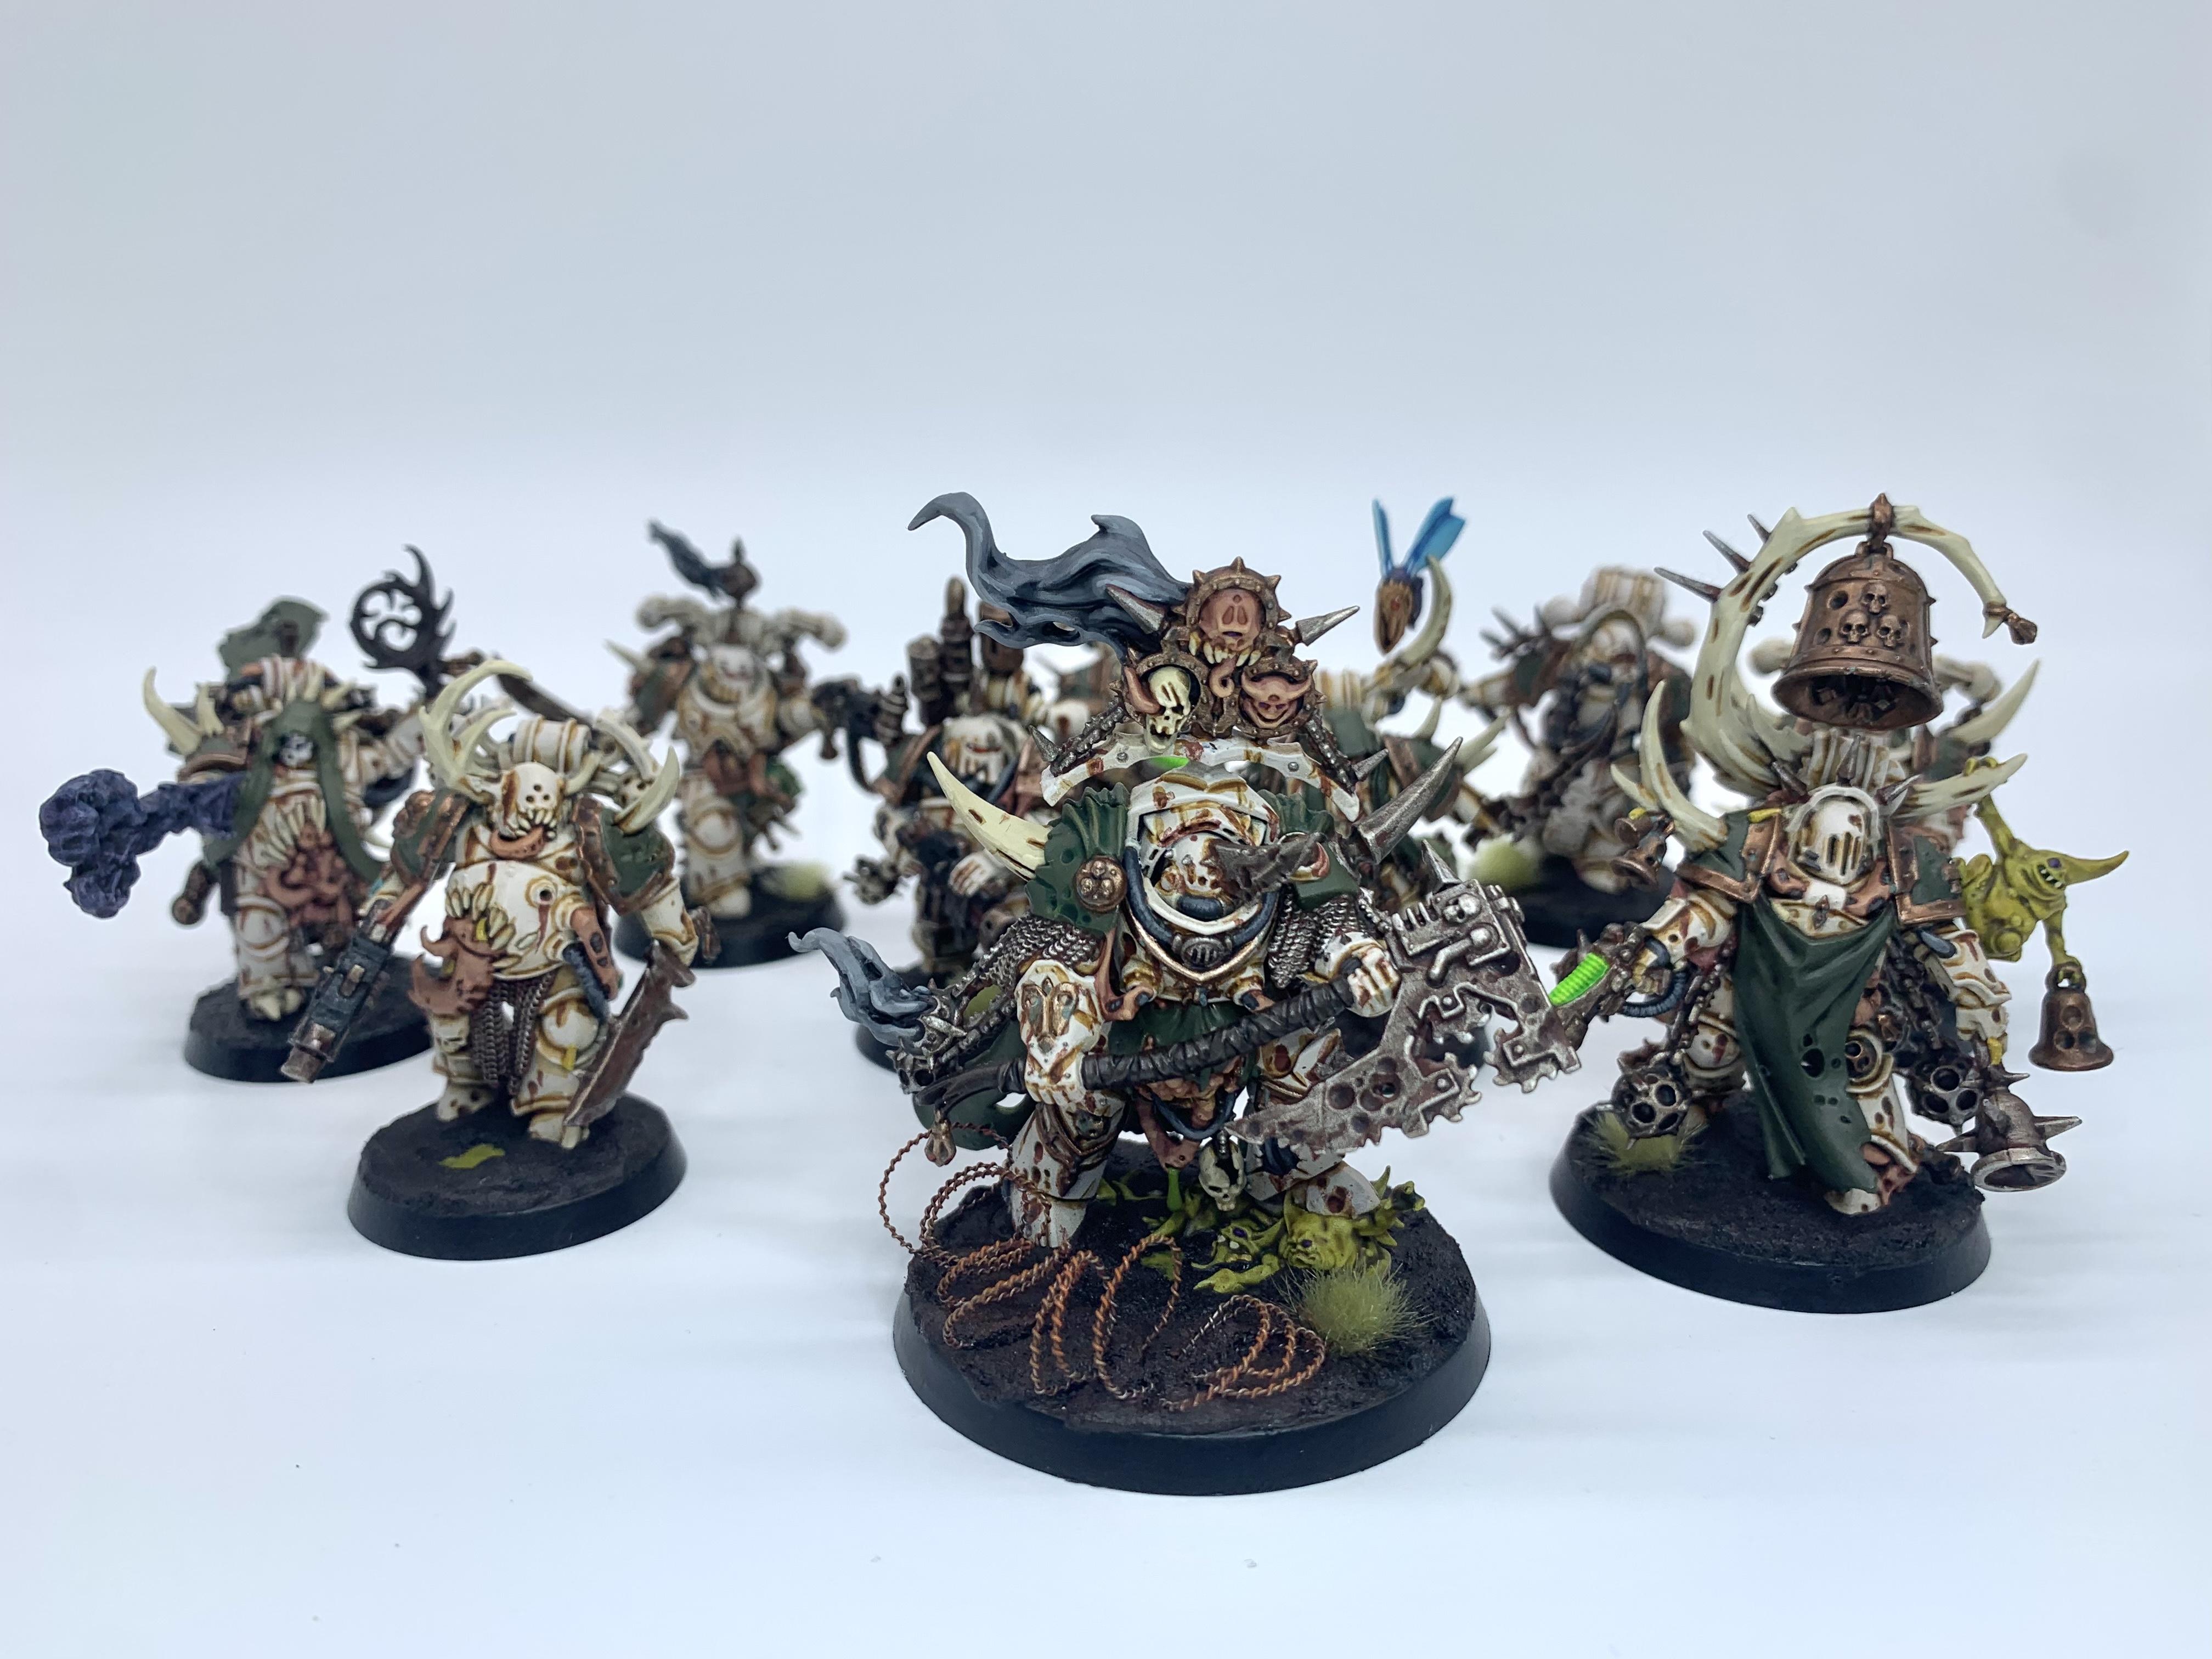 Battlefield Base, Chaos Lord, Chaos Space Marines, Death Guard, Lord Of Contagion, Mud, Plague Marines, Warhammer 40,000